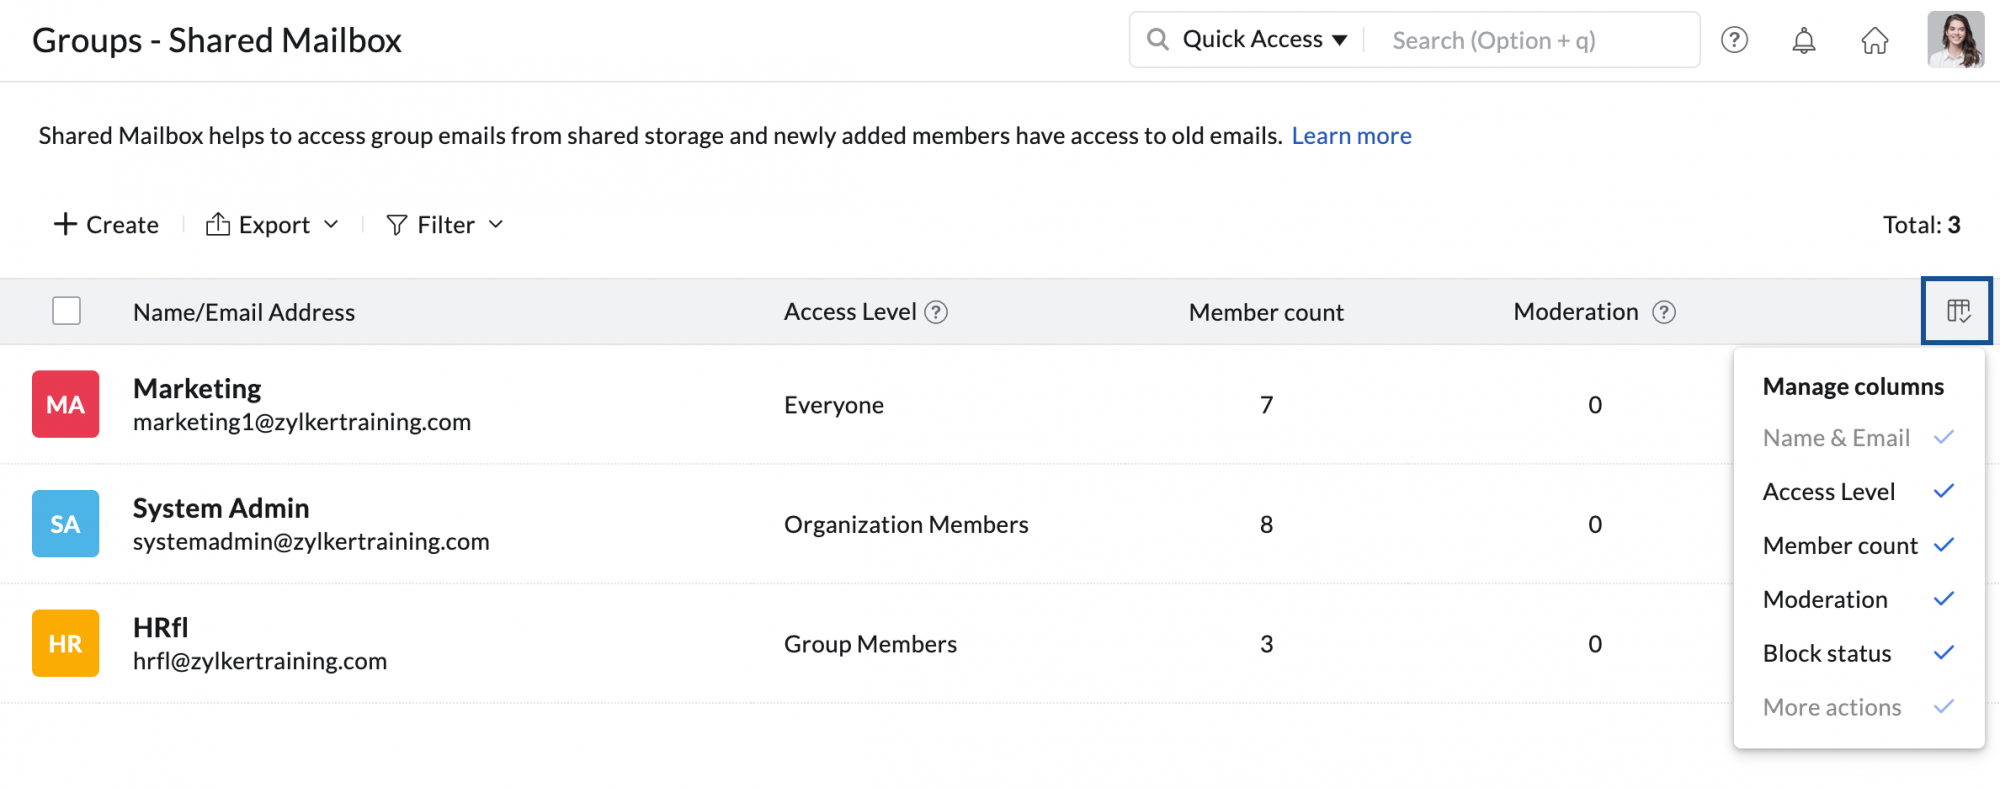 manage columns in shared mailbox